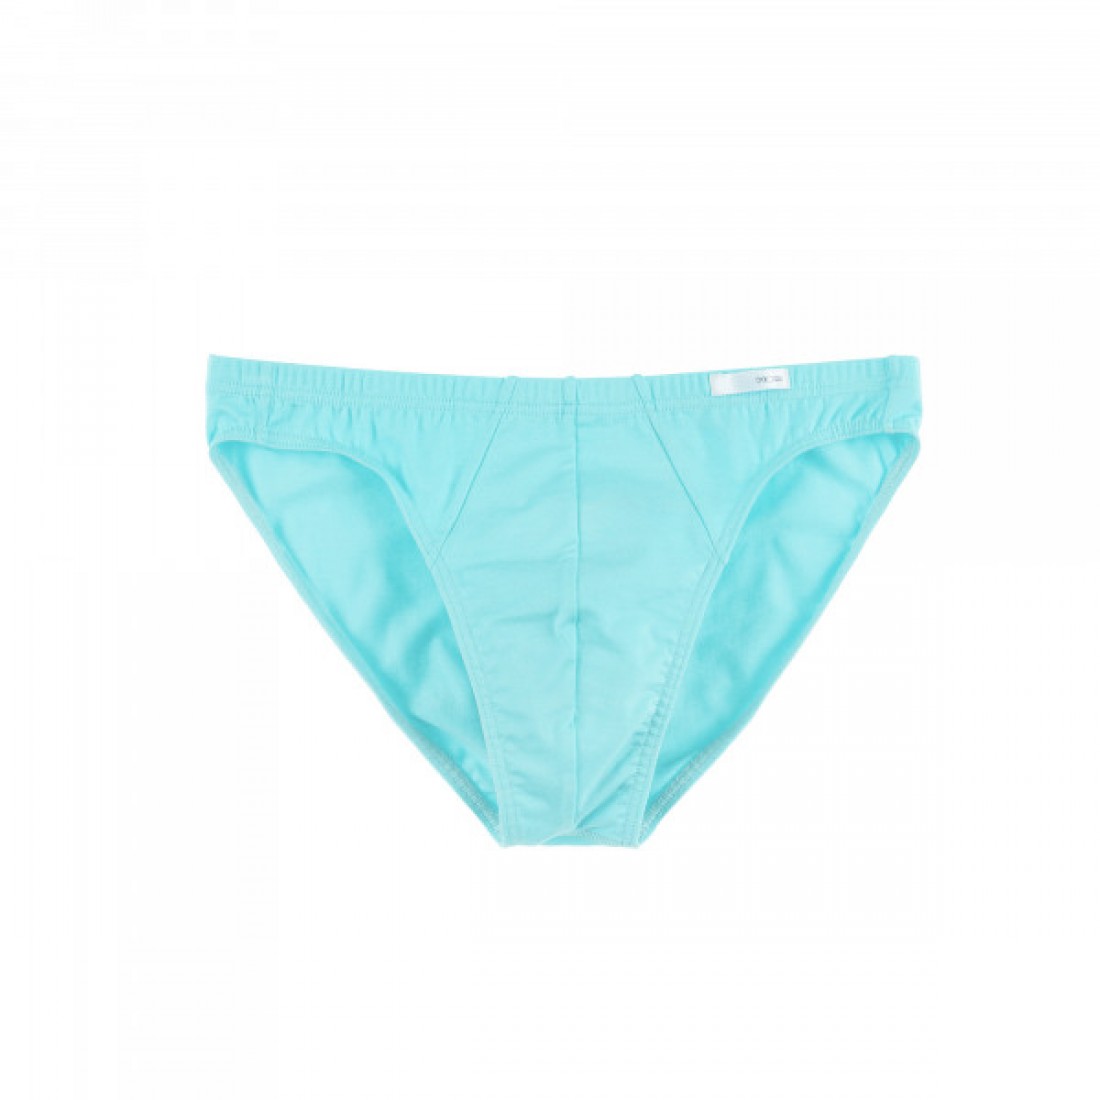 Buy Vogue HOM Classic micro-briefs store United Kingdom - All the people